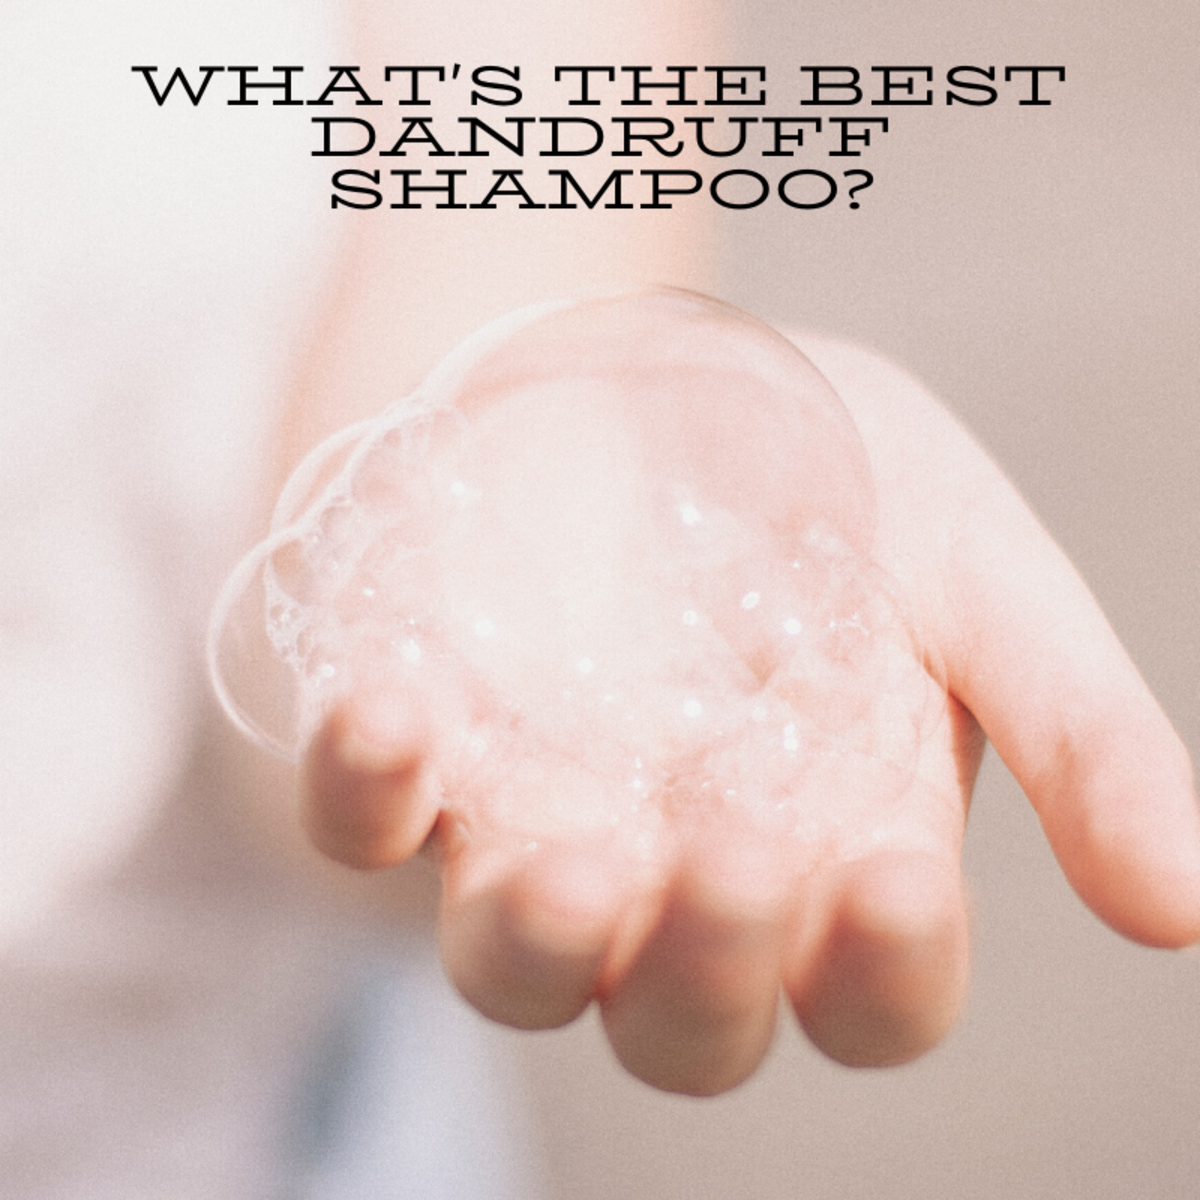 Read on to learn which dandruff shampoo is right for you.